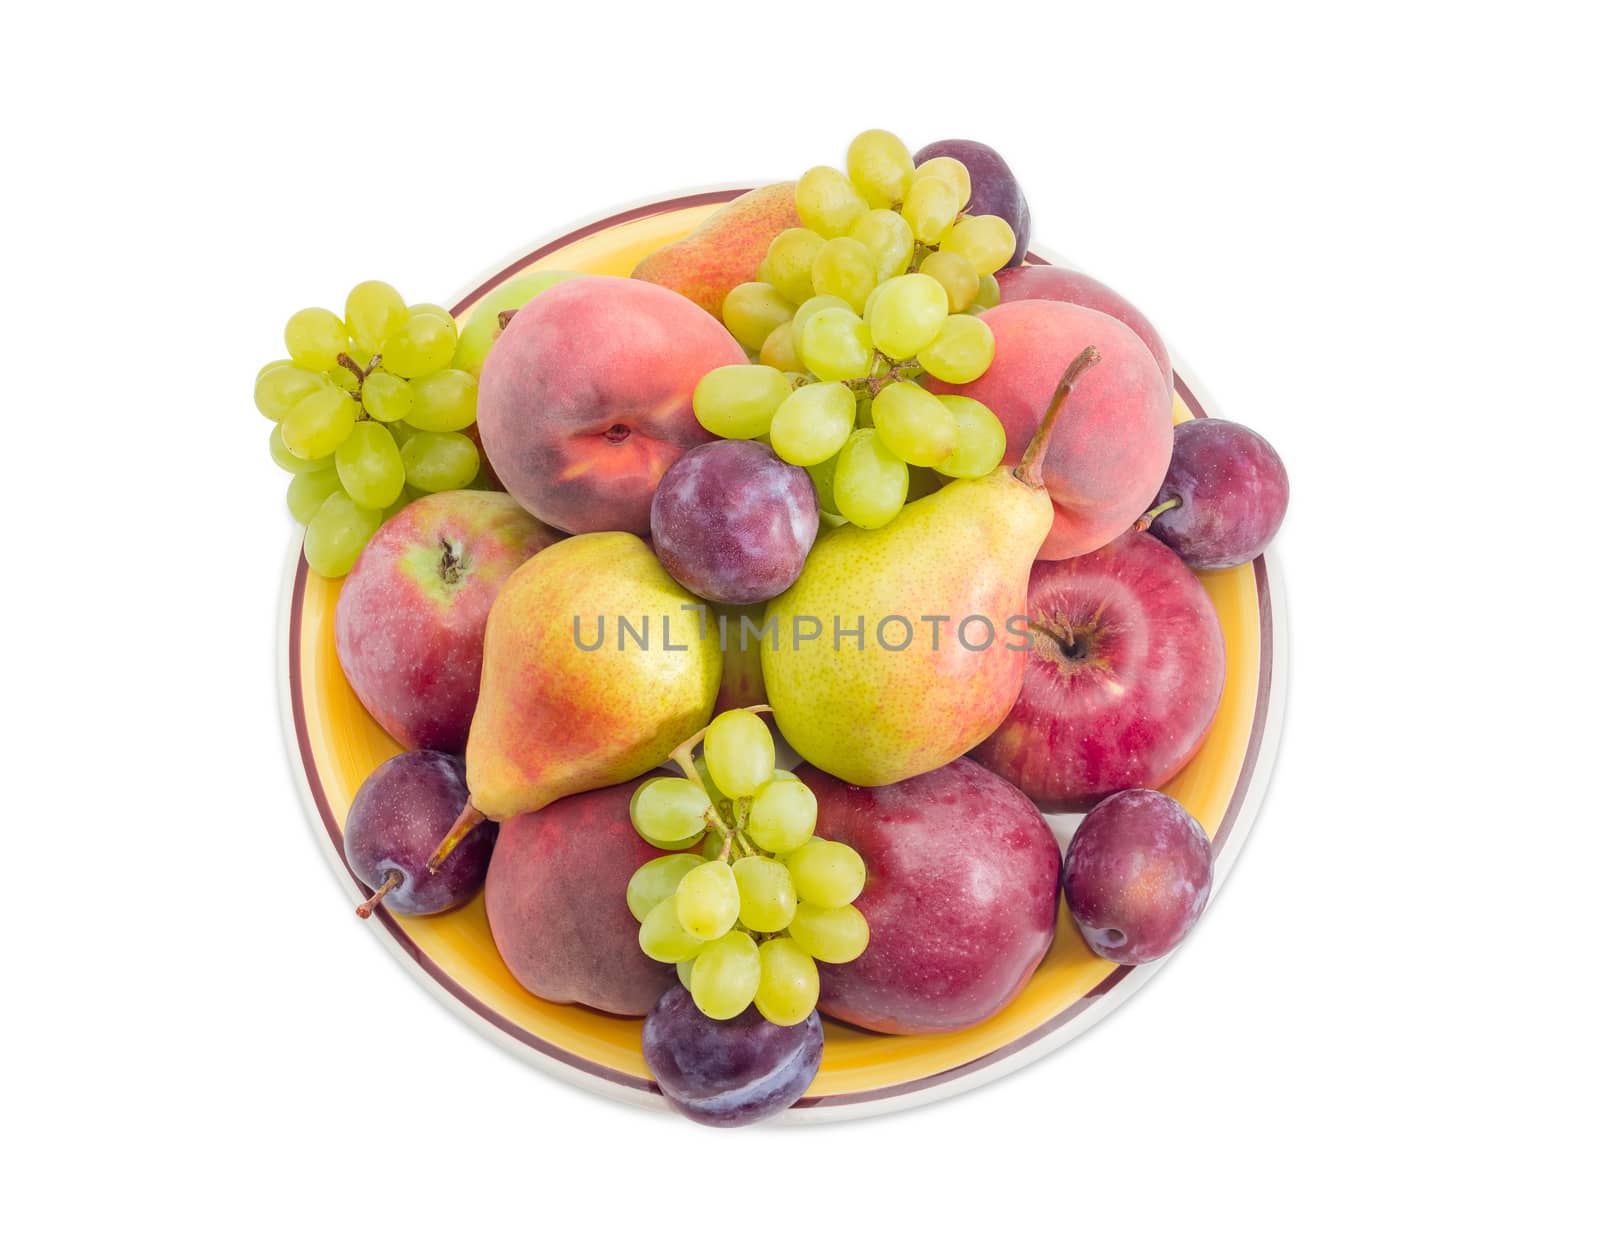 Top view of a pile of the apples, pears, plums, peaches and clusters of white grapes on a big yellow dish on a white background
